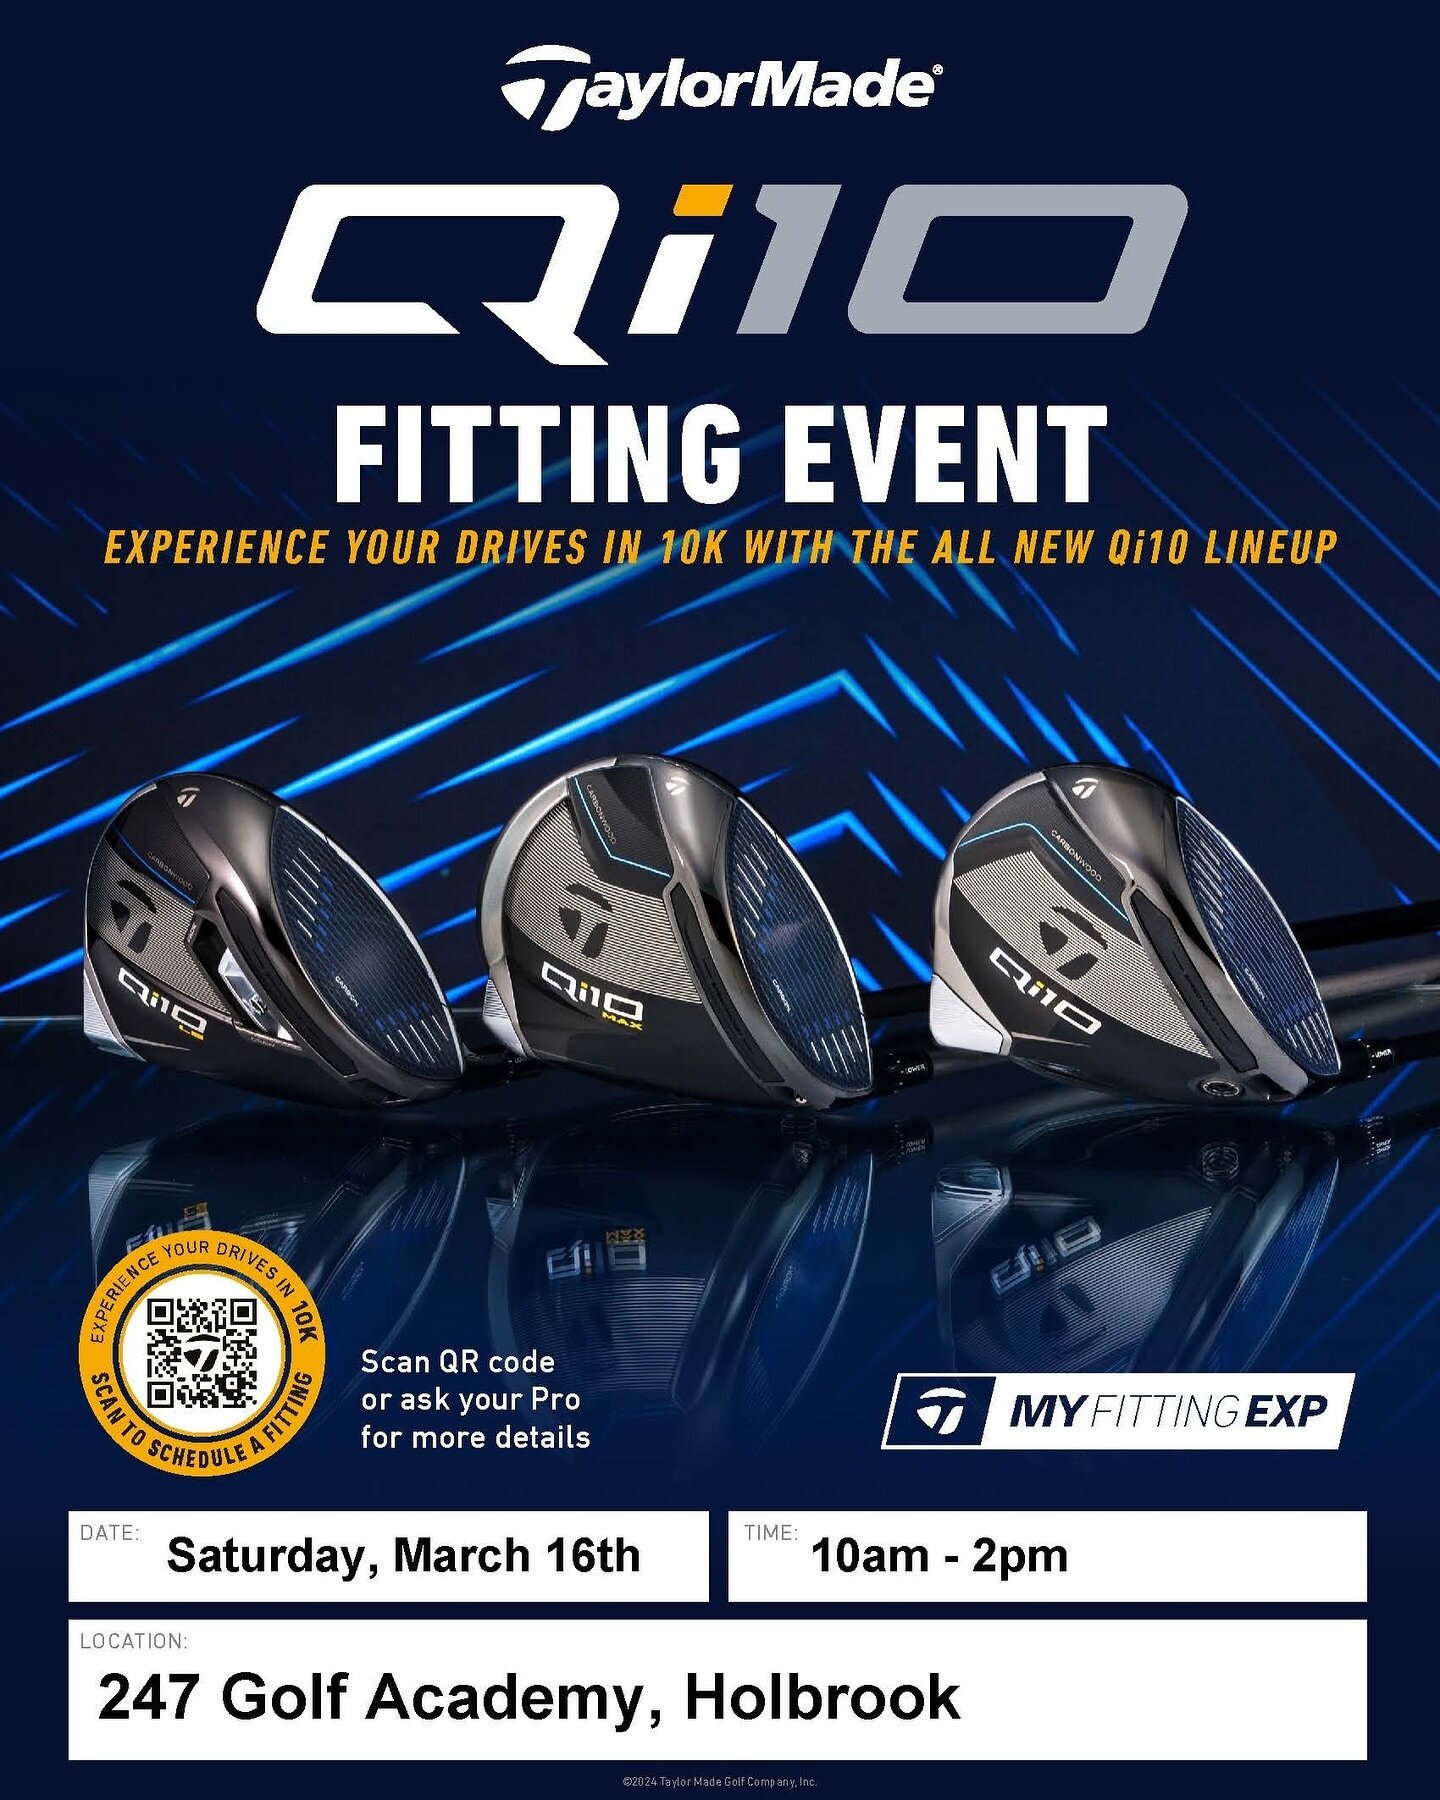 TM Demo Day March 16th! Try out the newest Taylor Made equipment including the new Qi10 Driver. 

$25/30 minute session. $50/hour. 
Purchase any club that day and receive your full demo fee towards the purchase. 

Reserve your spot online through our